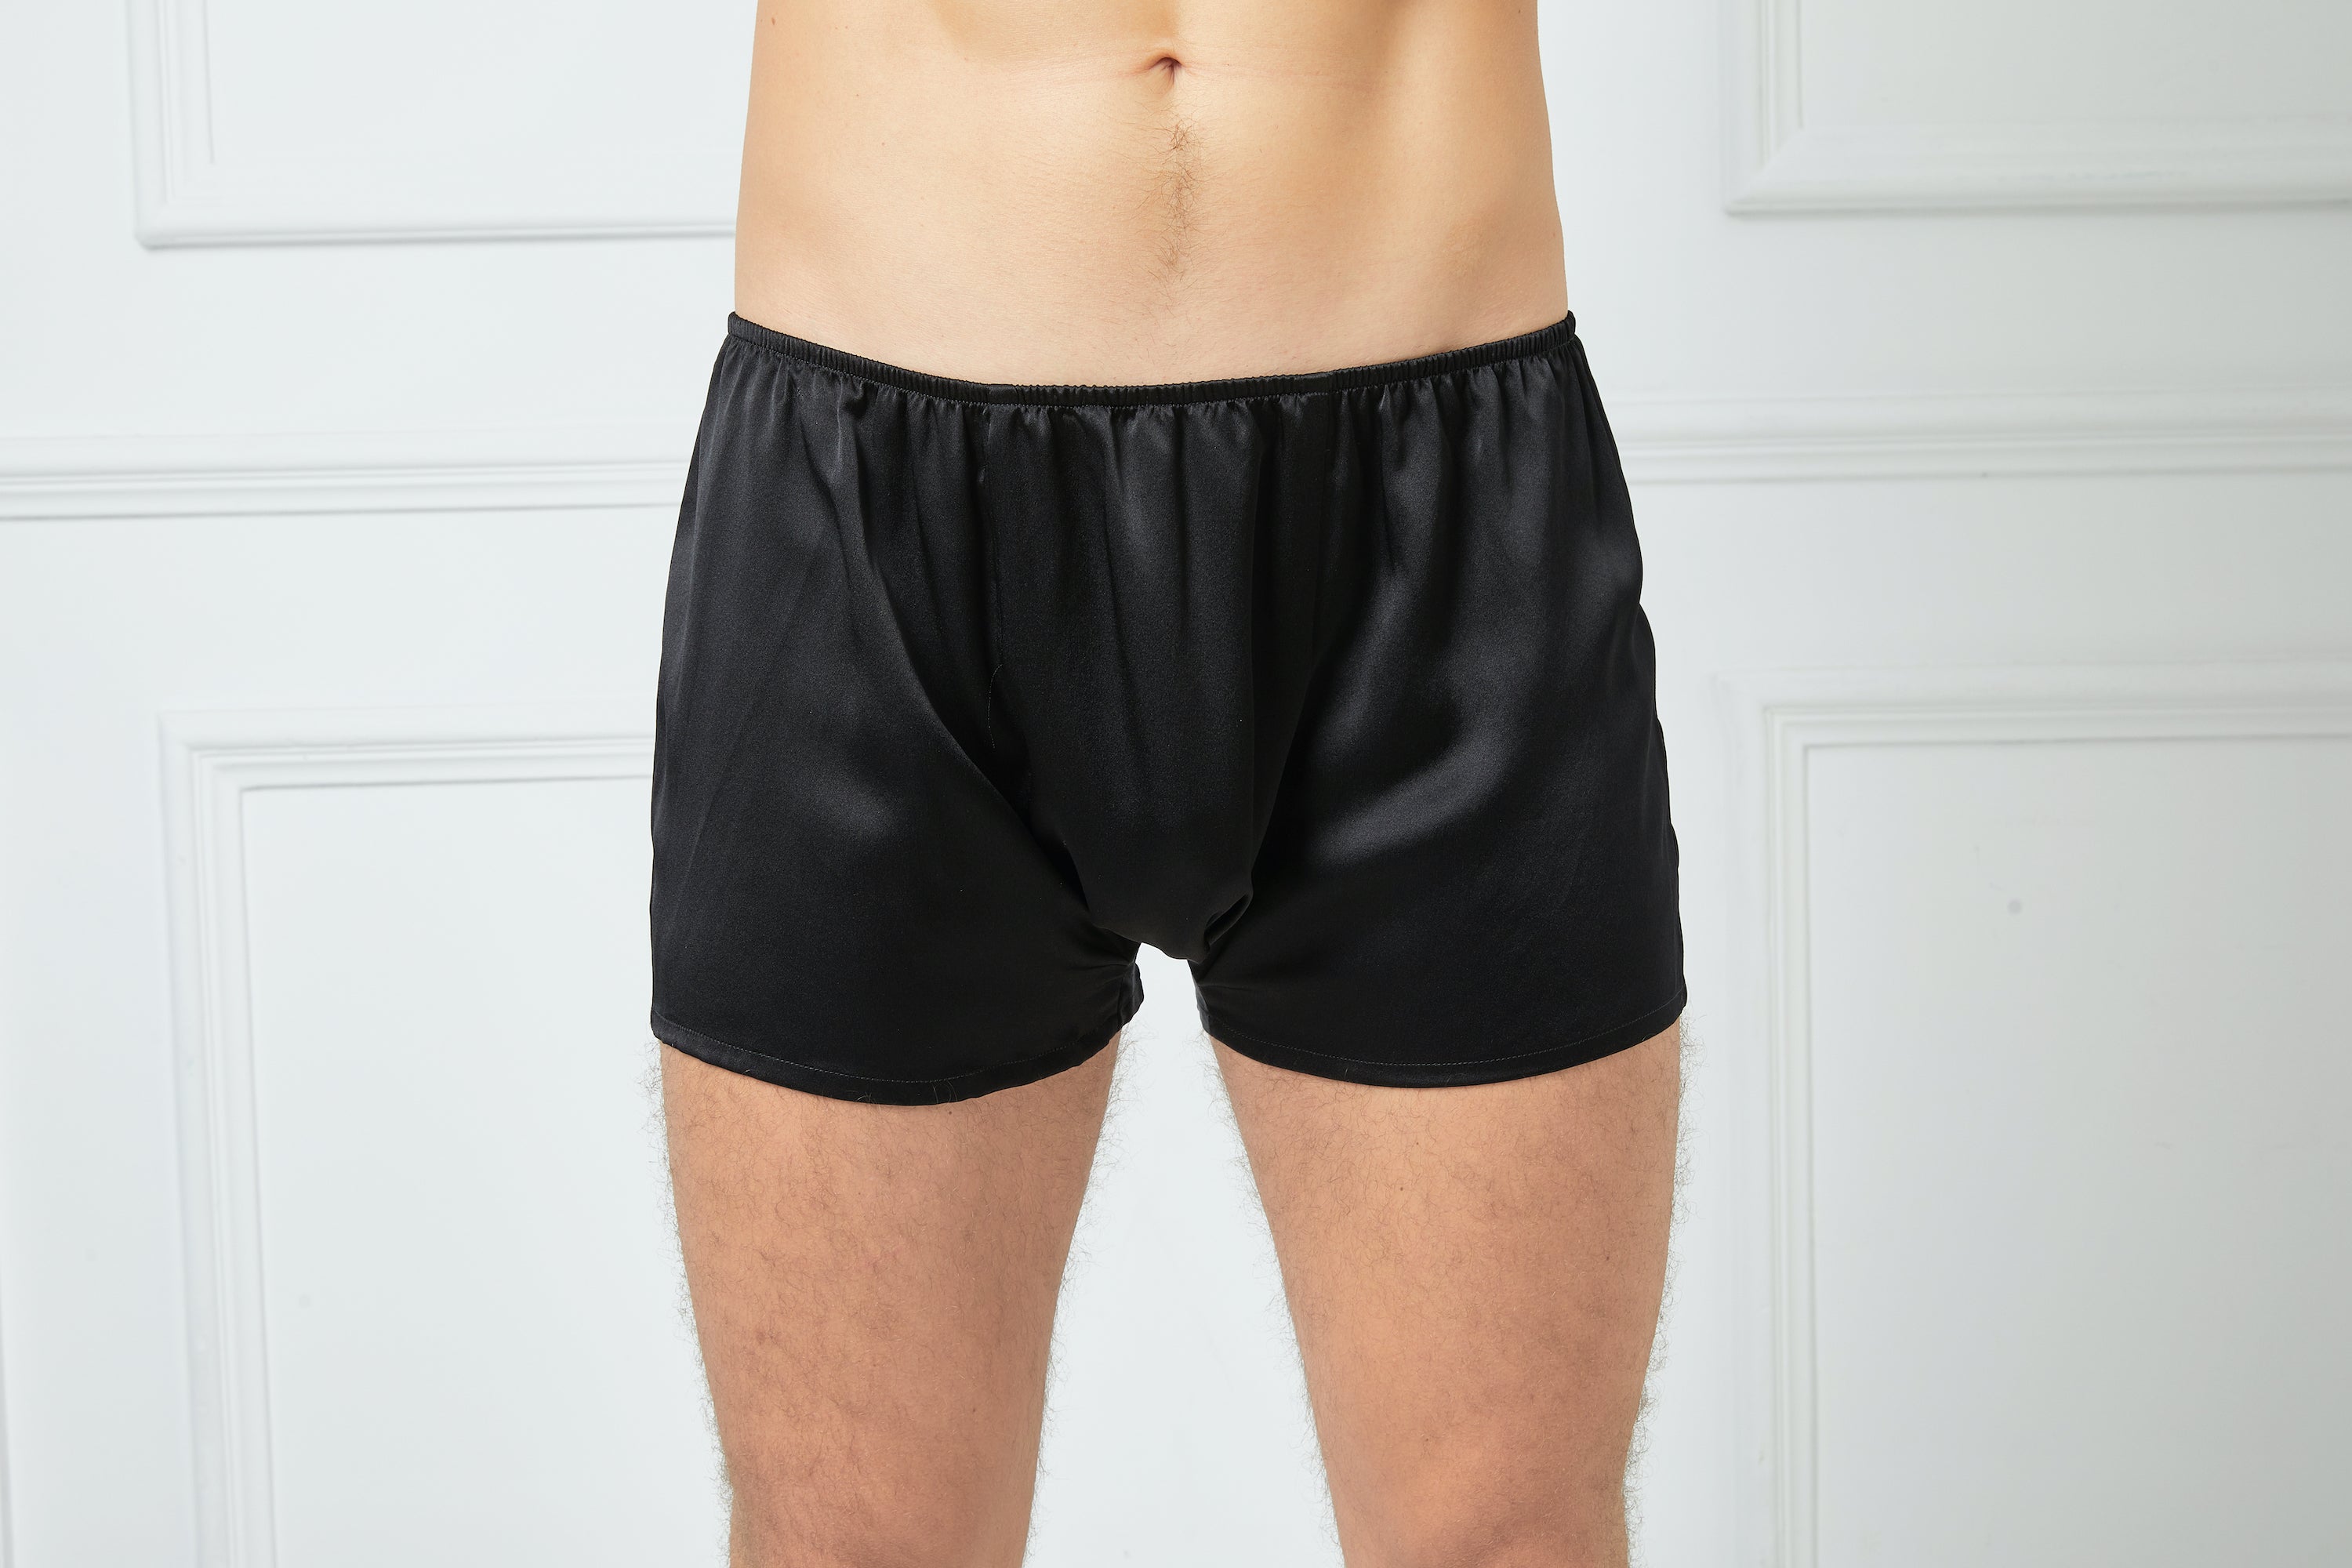 Wholesale Pearl Underwear for Men, Stylish Undergarments For Him 